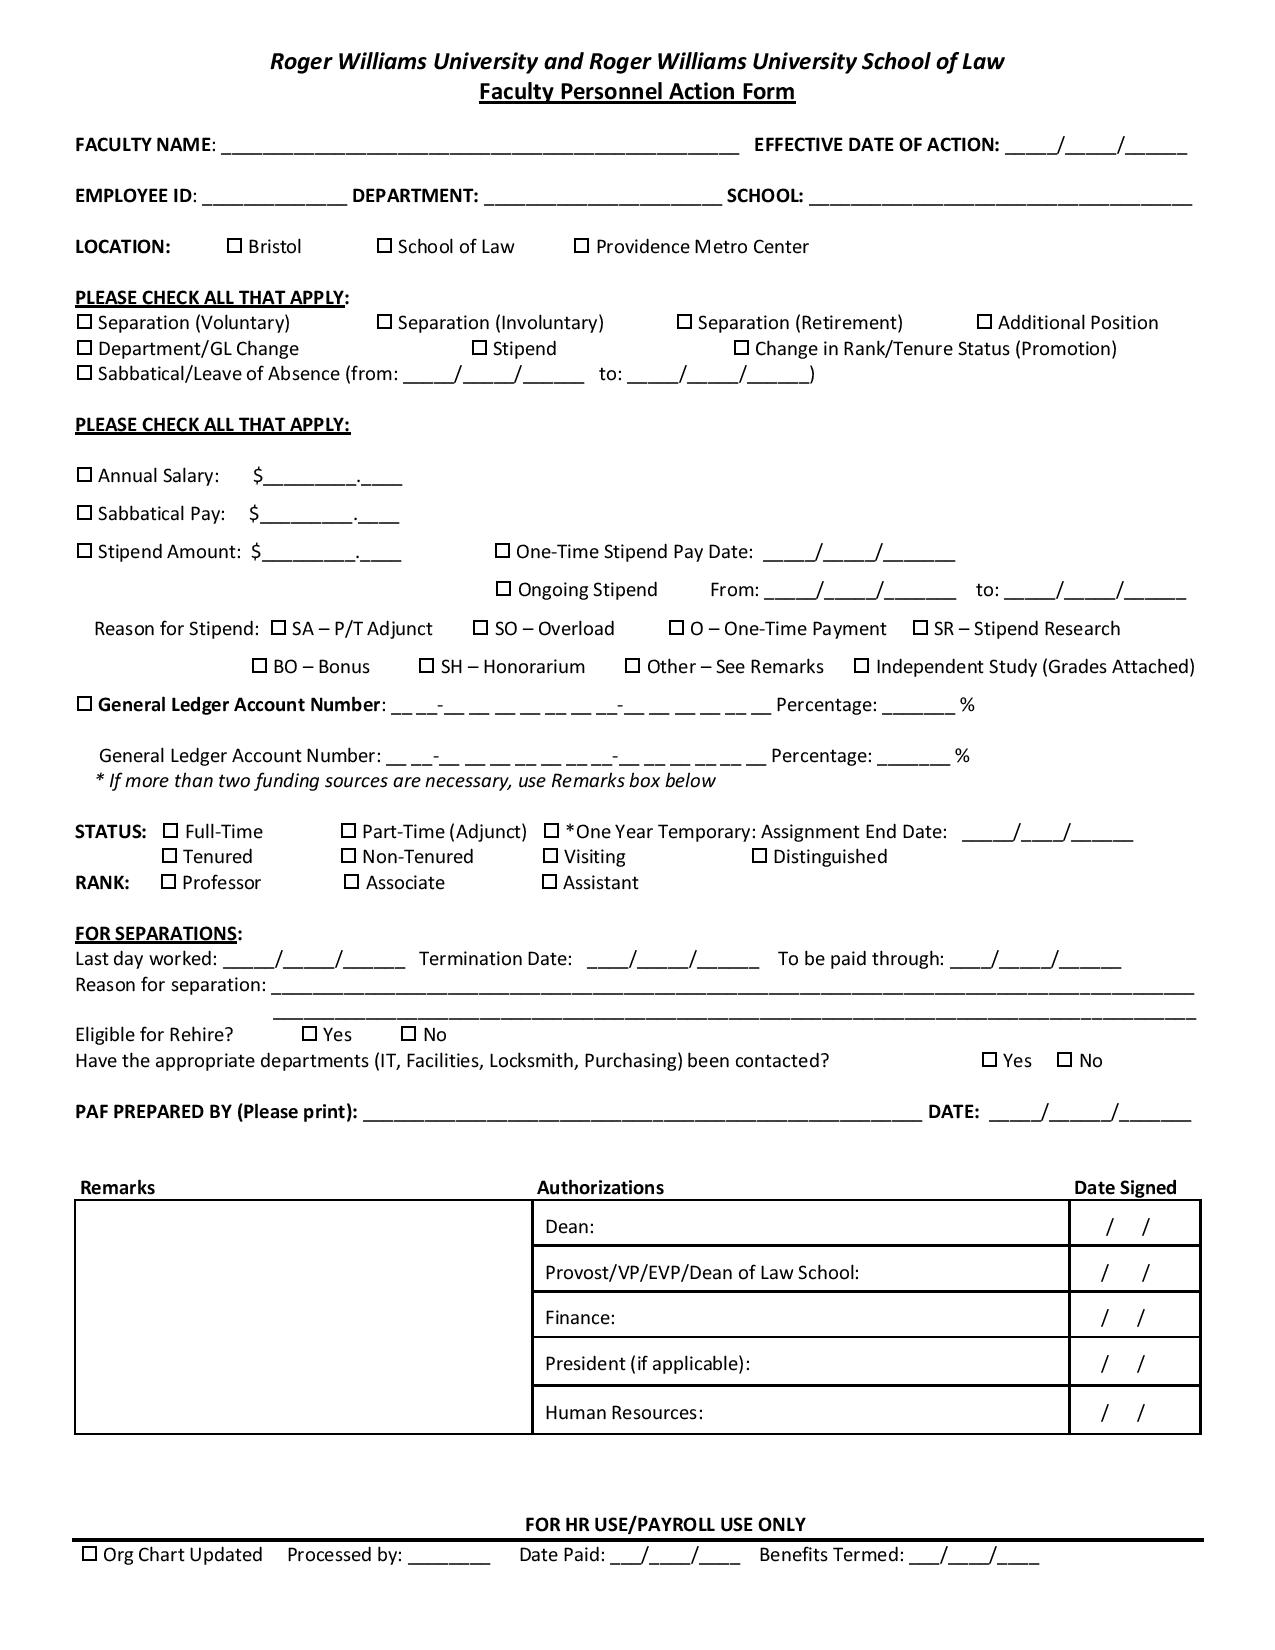 faculty personnel action form in pdf page 001